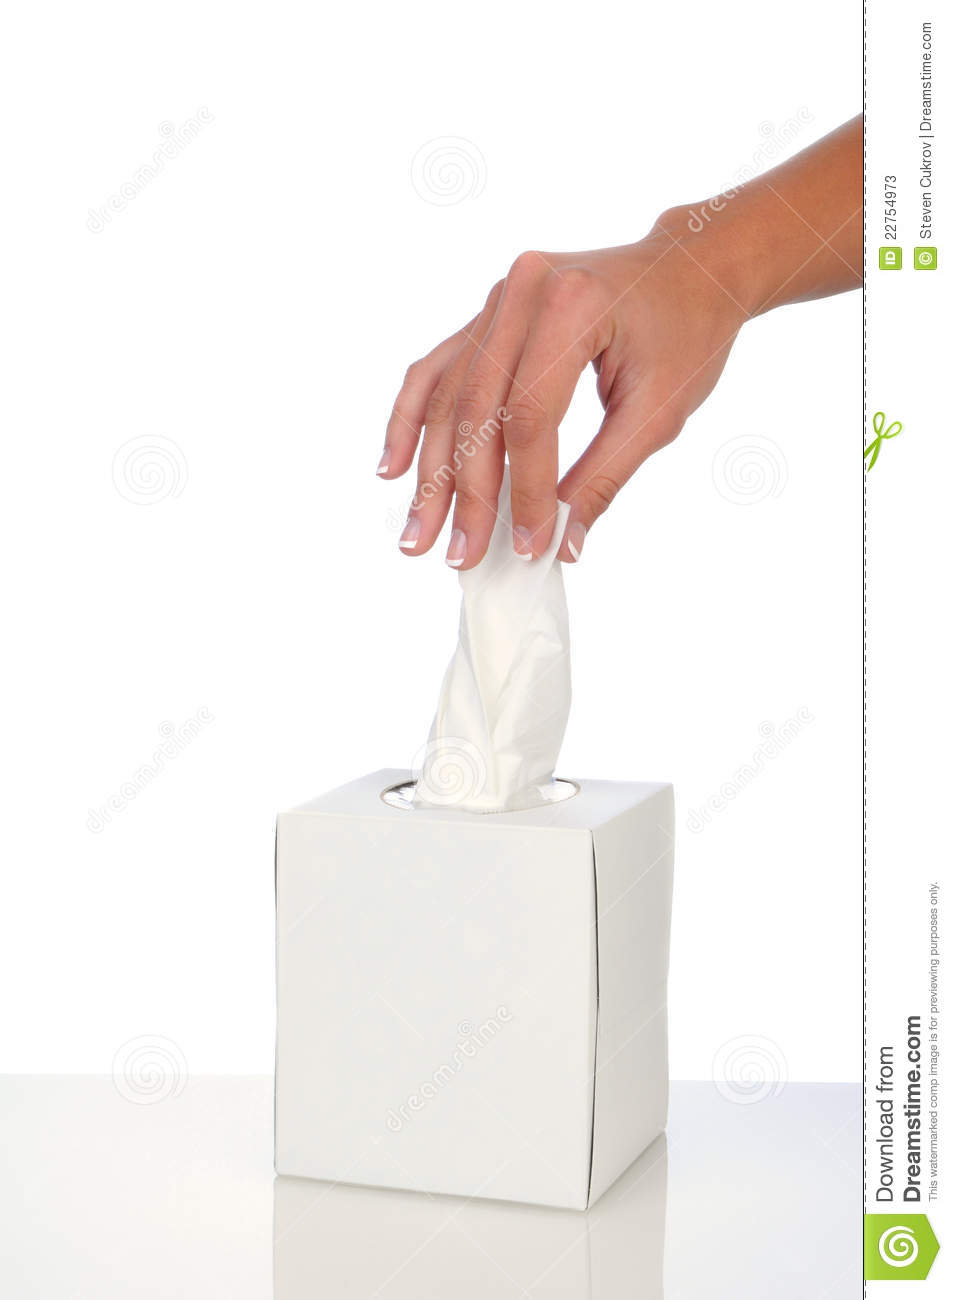 Closeup Of A Woman S Hand Pulling A Facial Tissue From A Box  Vertical